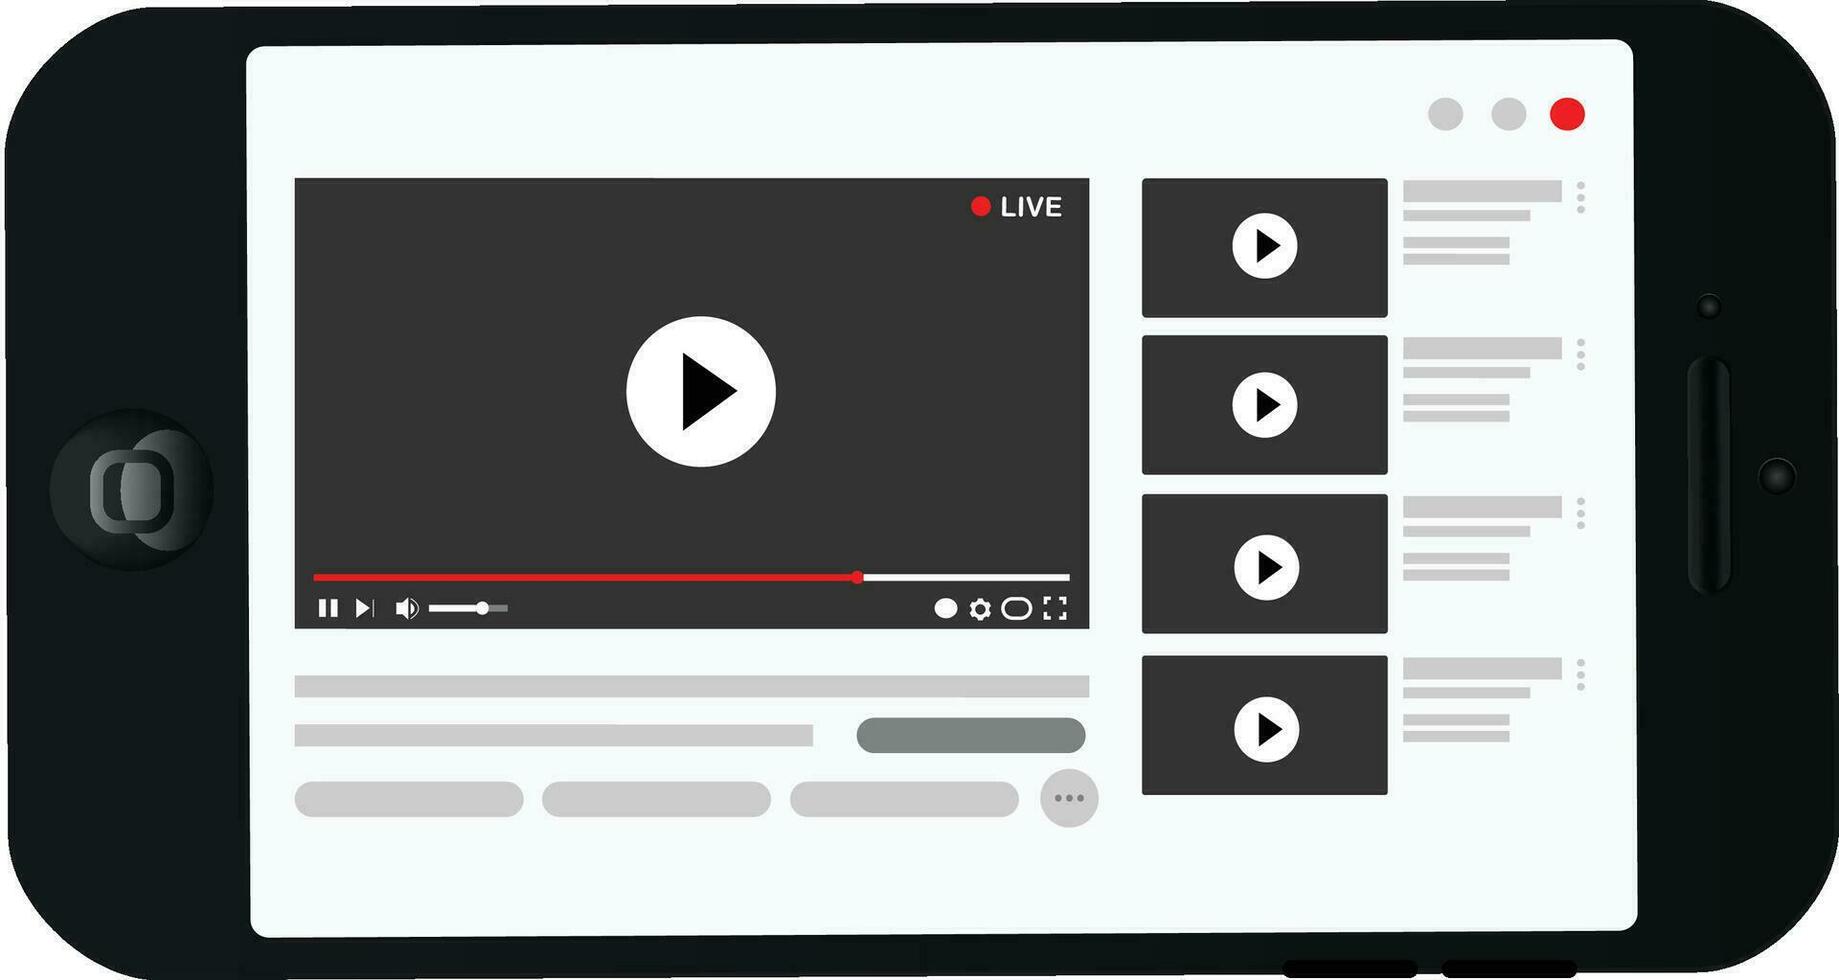 Video streaming service on a smartphone display vector illustration, broadcasting multimedia video player pictogram